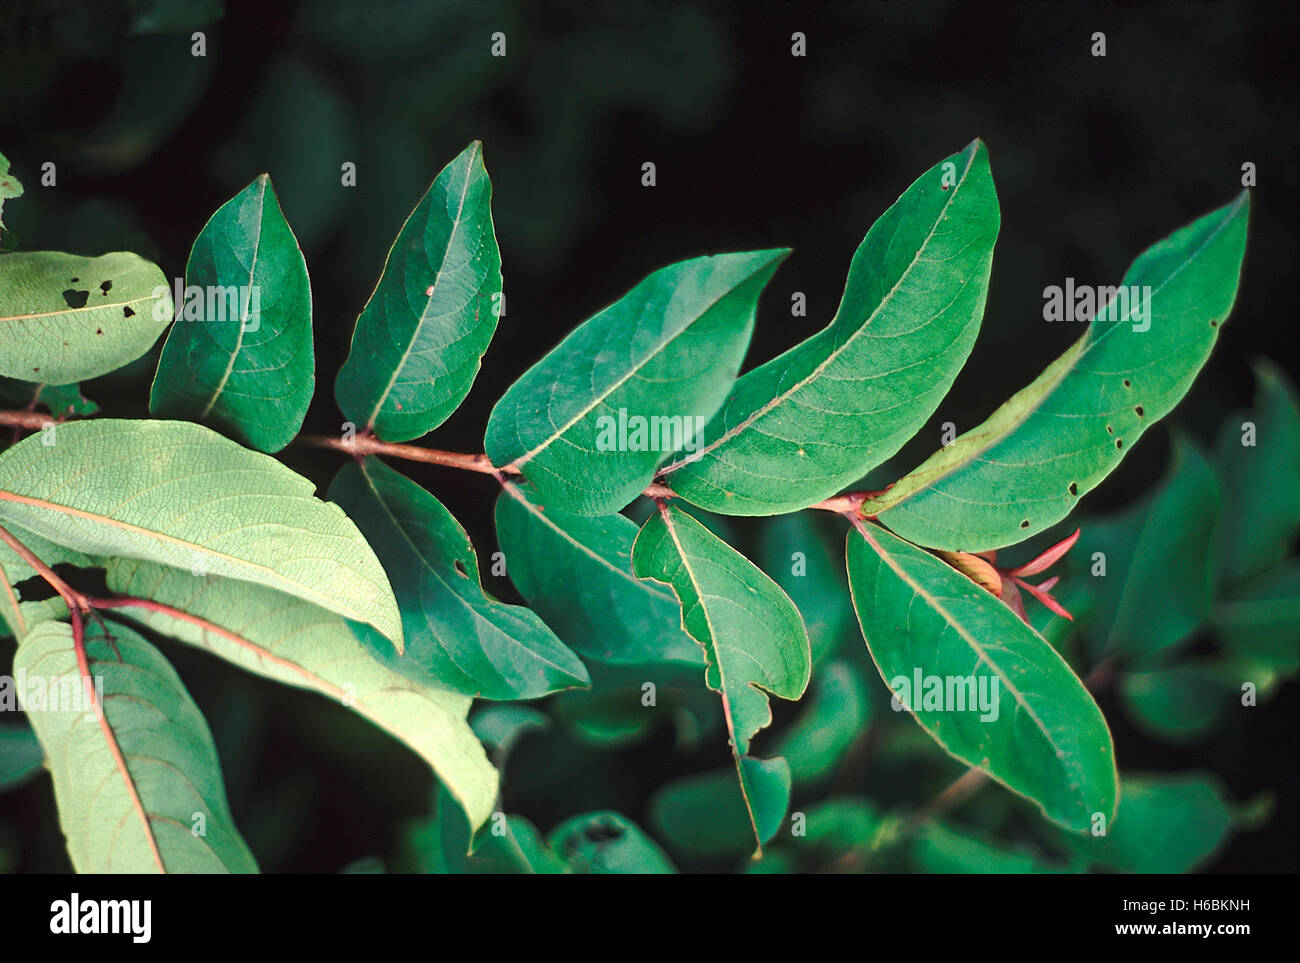 Leaves. Anogeissus Latifolia. Family: Combretaceae. A large deciduous tree. One of the dominant tree species of the dry deciduou Stock Photo